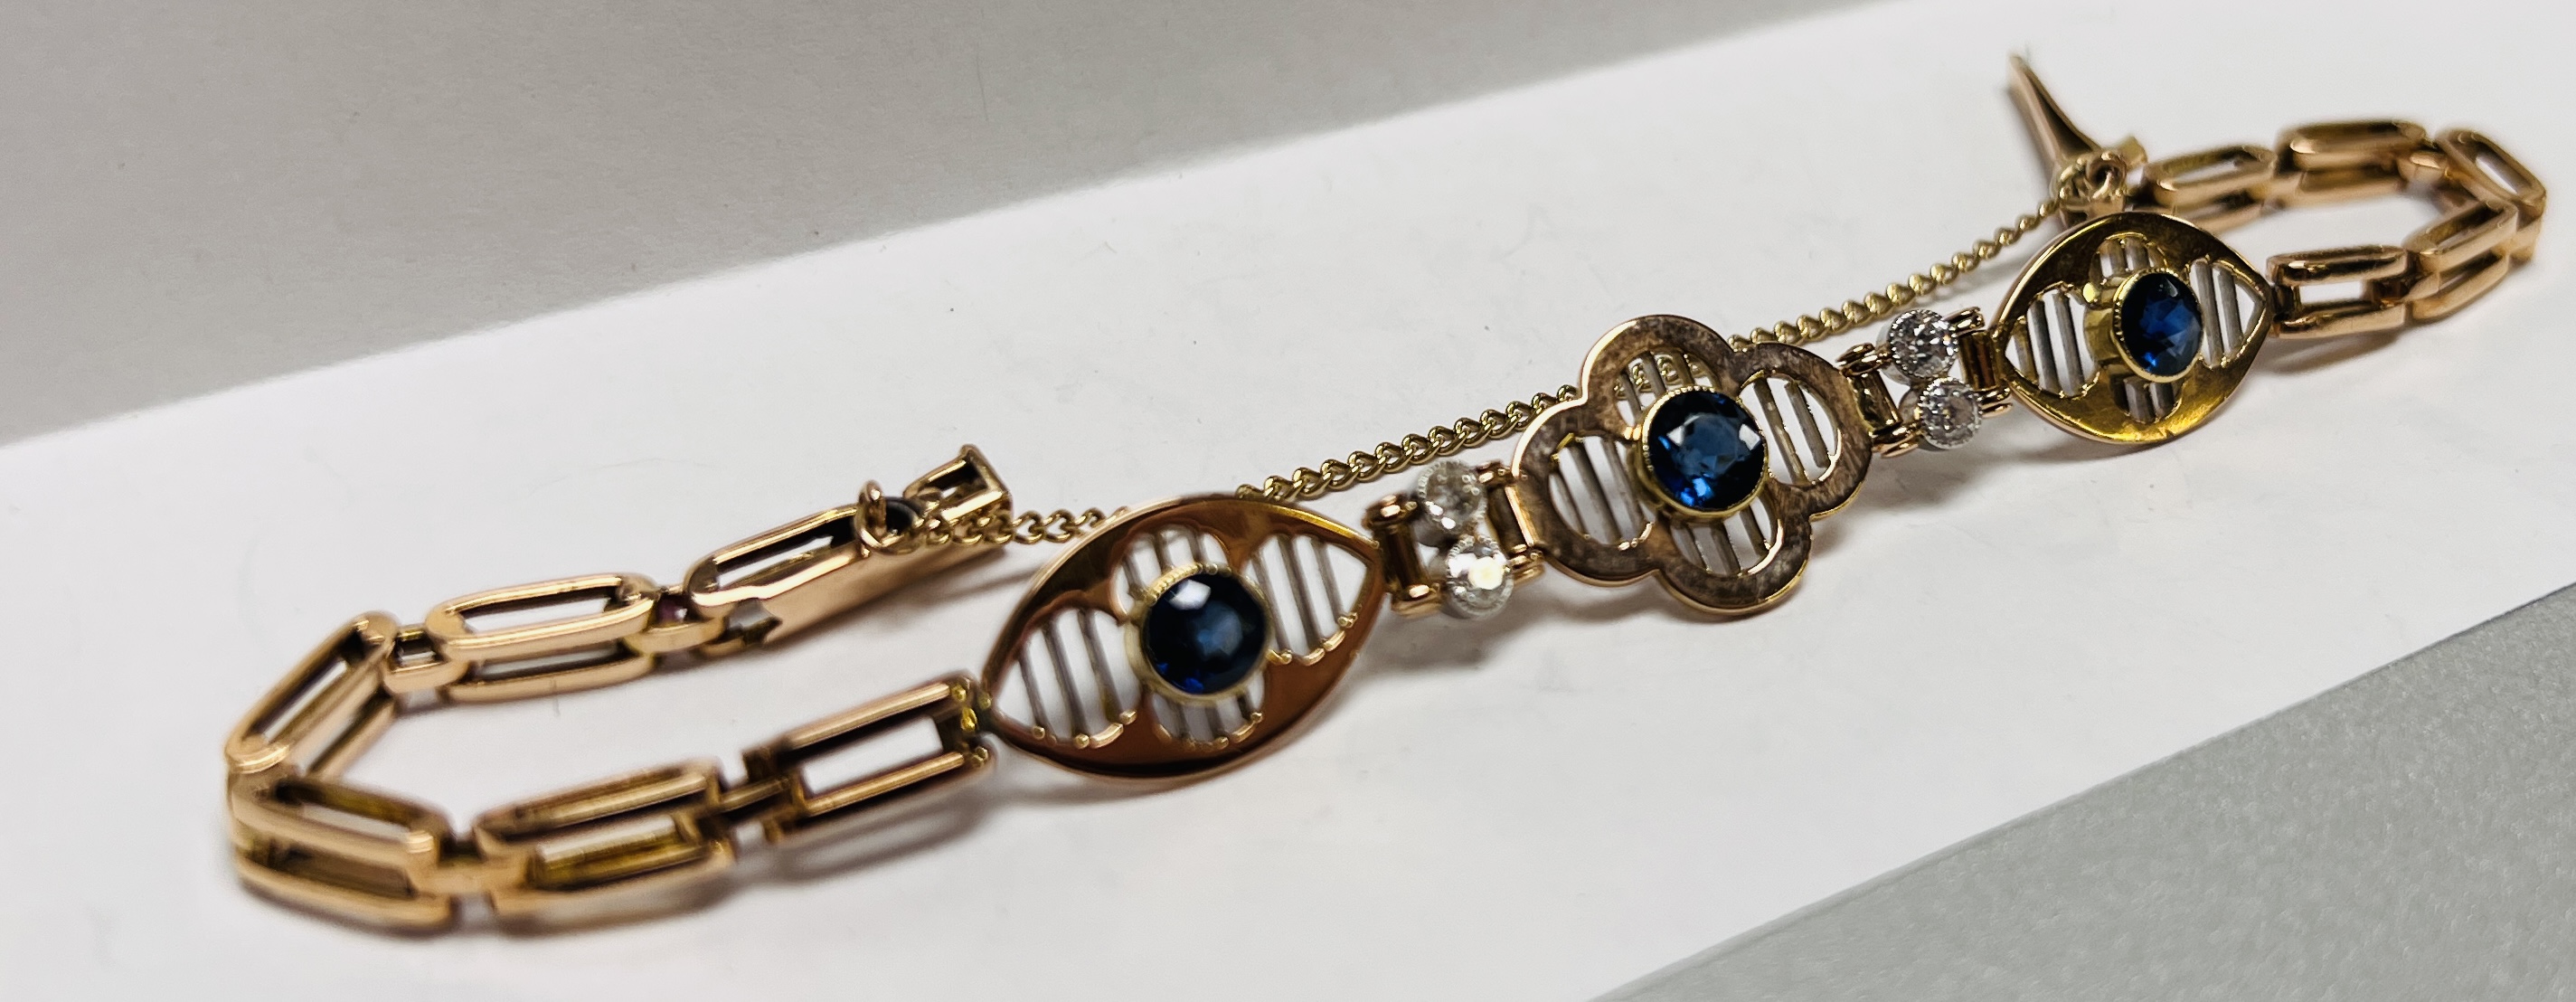 A VINTAGE DIAMOND AND SAPPHIRE BRACELET AND SAFETY CHAIN, - Image 5 of 8